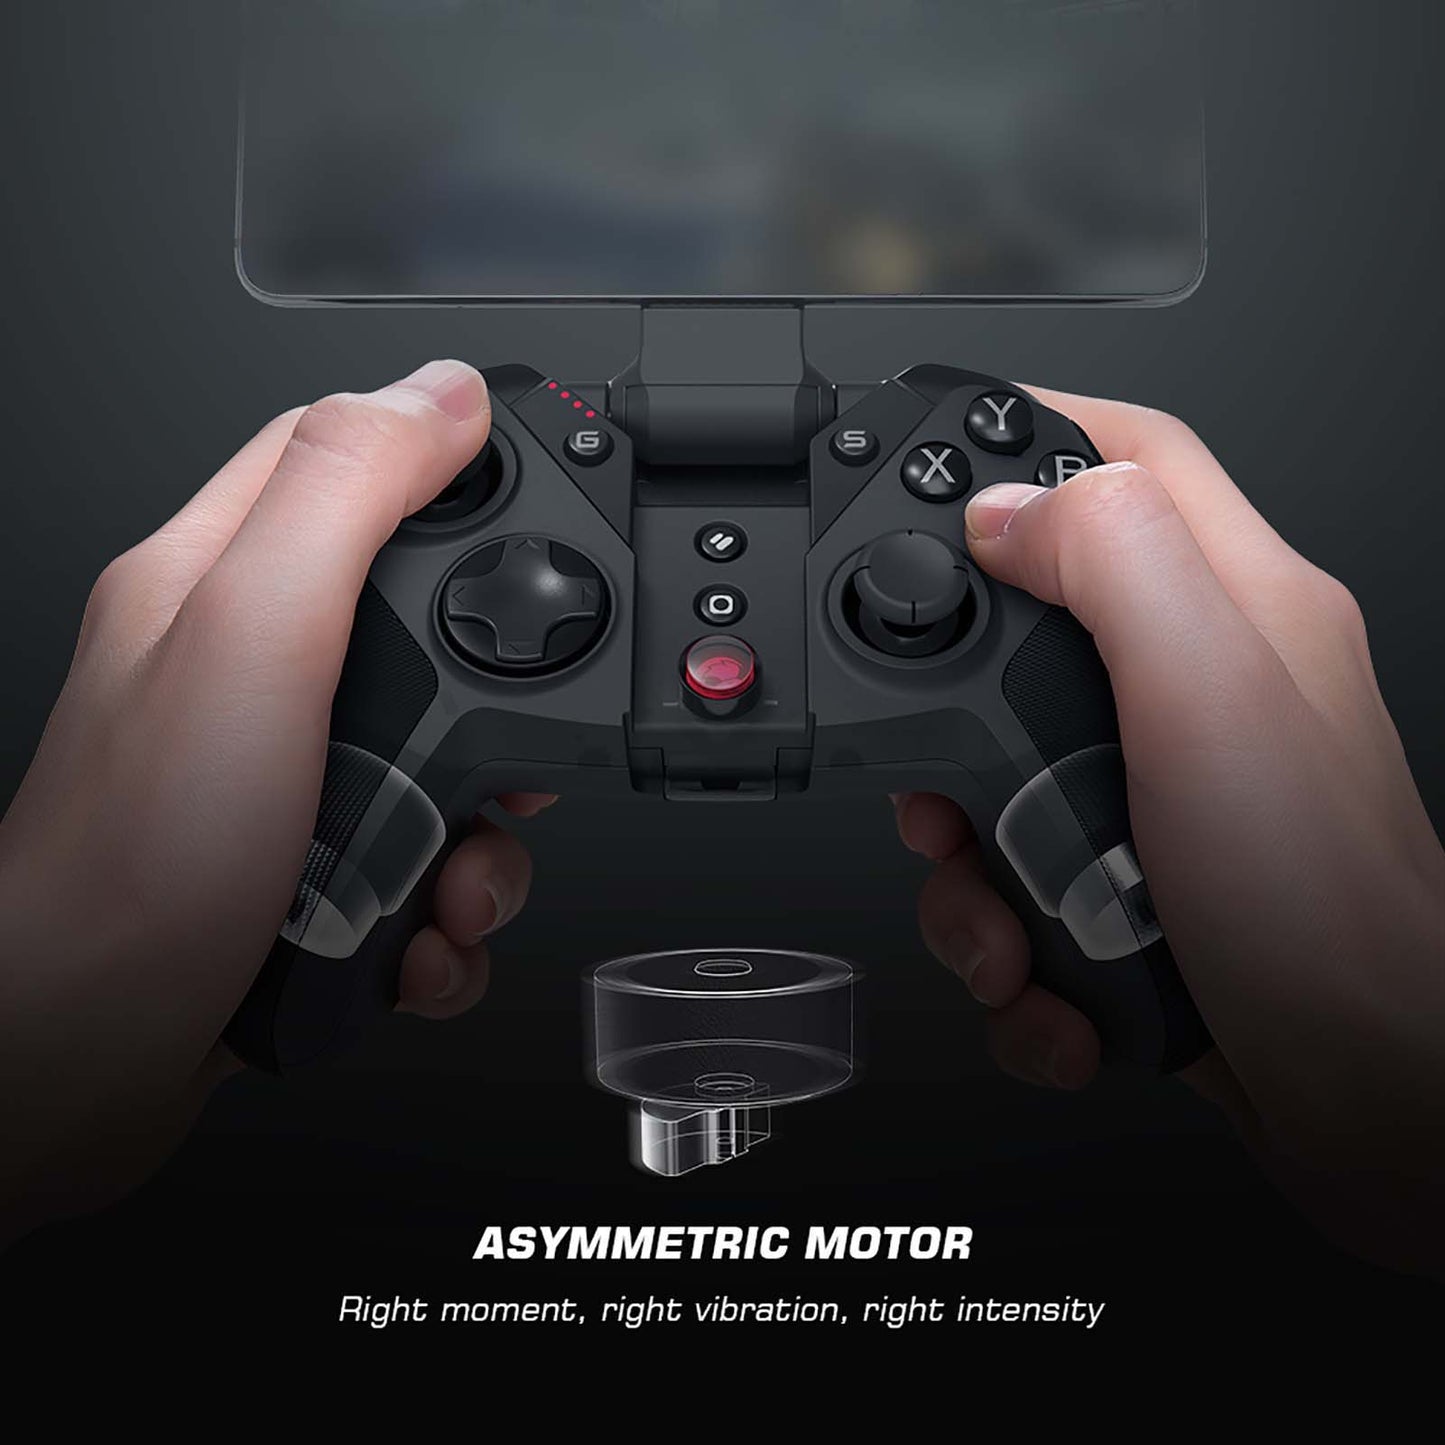 GameSir G4 Pro Multi-platform Game Controller BT 2.4GHz Wireless Gamepad Joystick for Android/iOS/PC/Switch Game Playing Toy Gift for Kids Adults